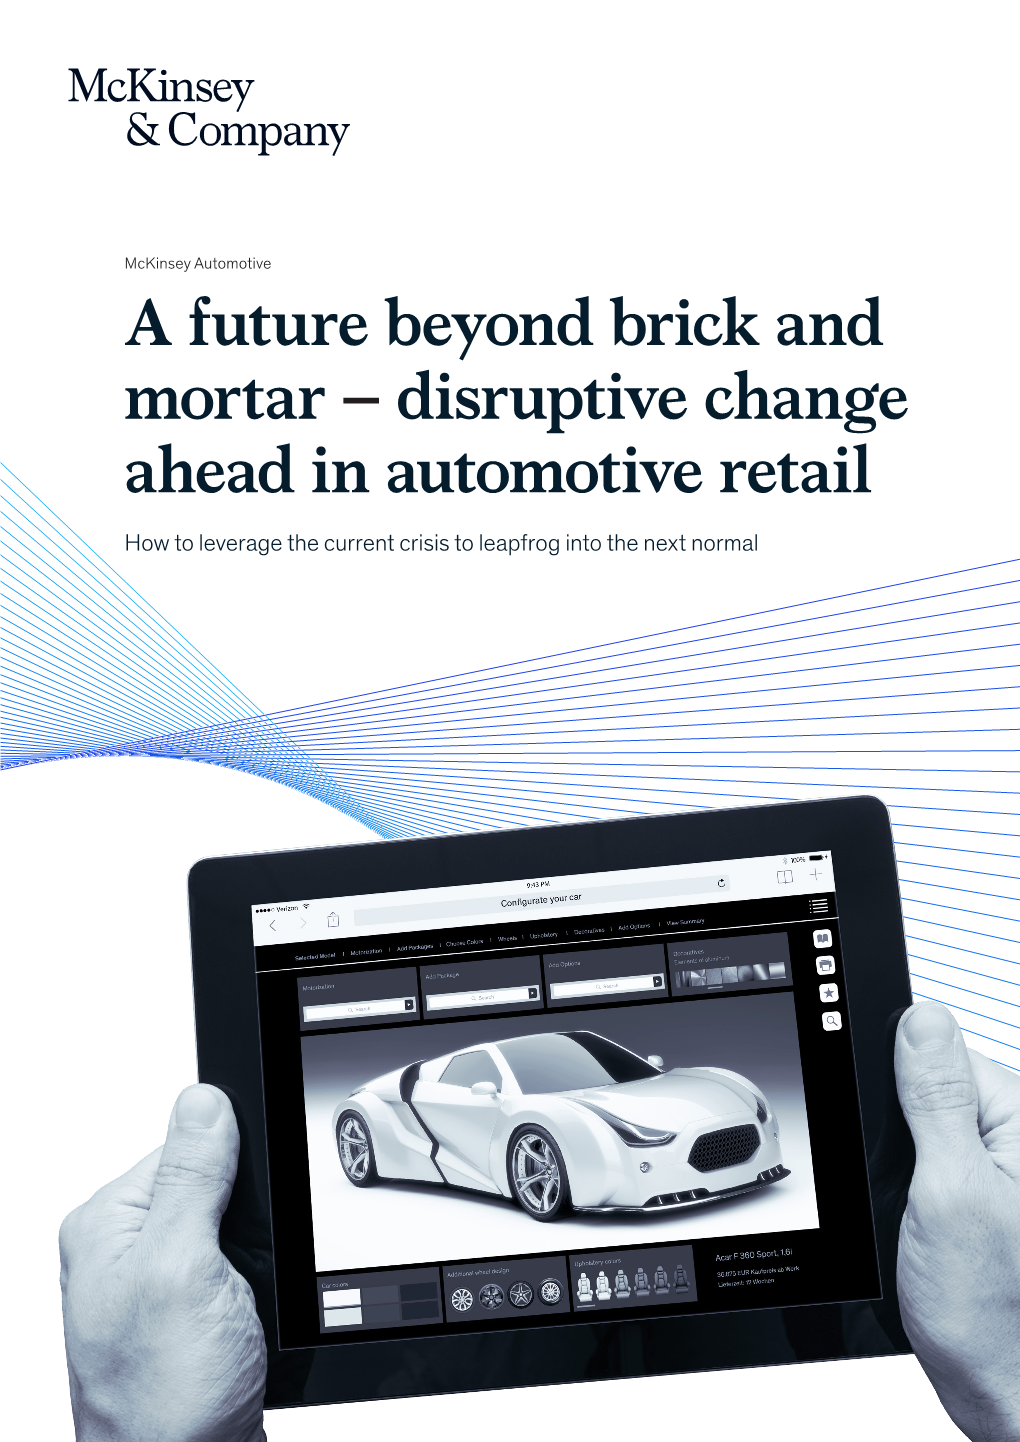 A Future Beyond Brick and Mortar: Disruption in Automotive Retail